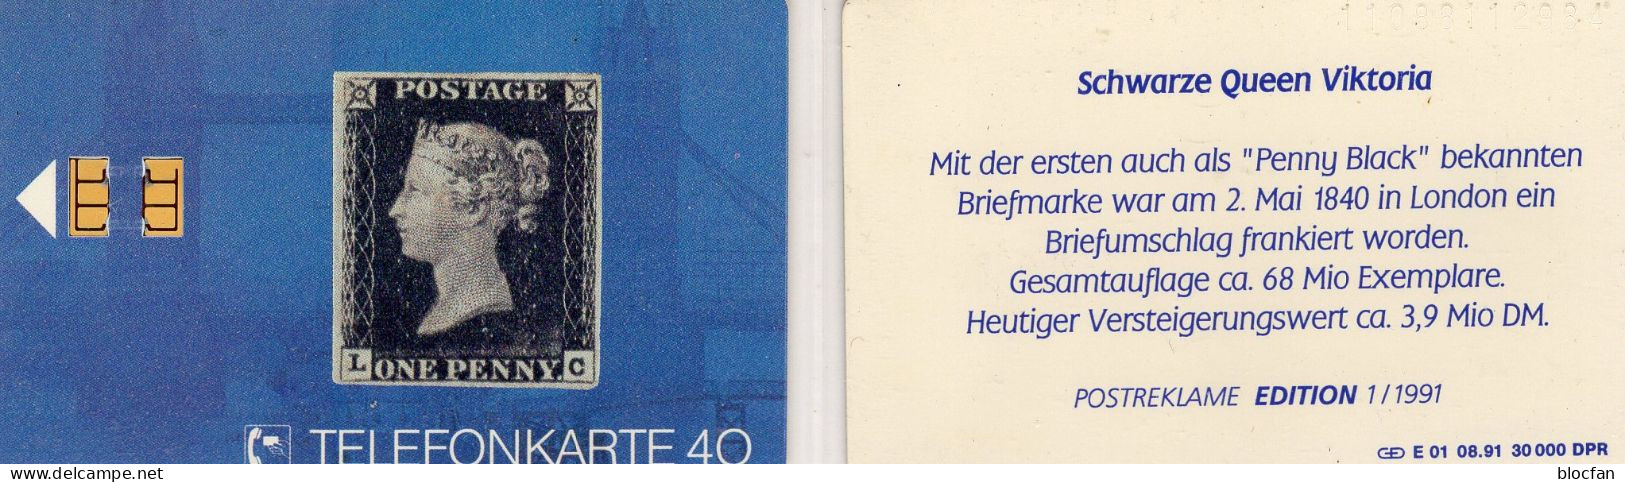 Penny Black 1840 TK E01/1991 30.000 Expl.** 25€ Edition 1 Schwarze Queen Victoria  TC History Stamp On Phonecard Germany - E-Series: Editionsausgabe Der Dt. Postreklame